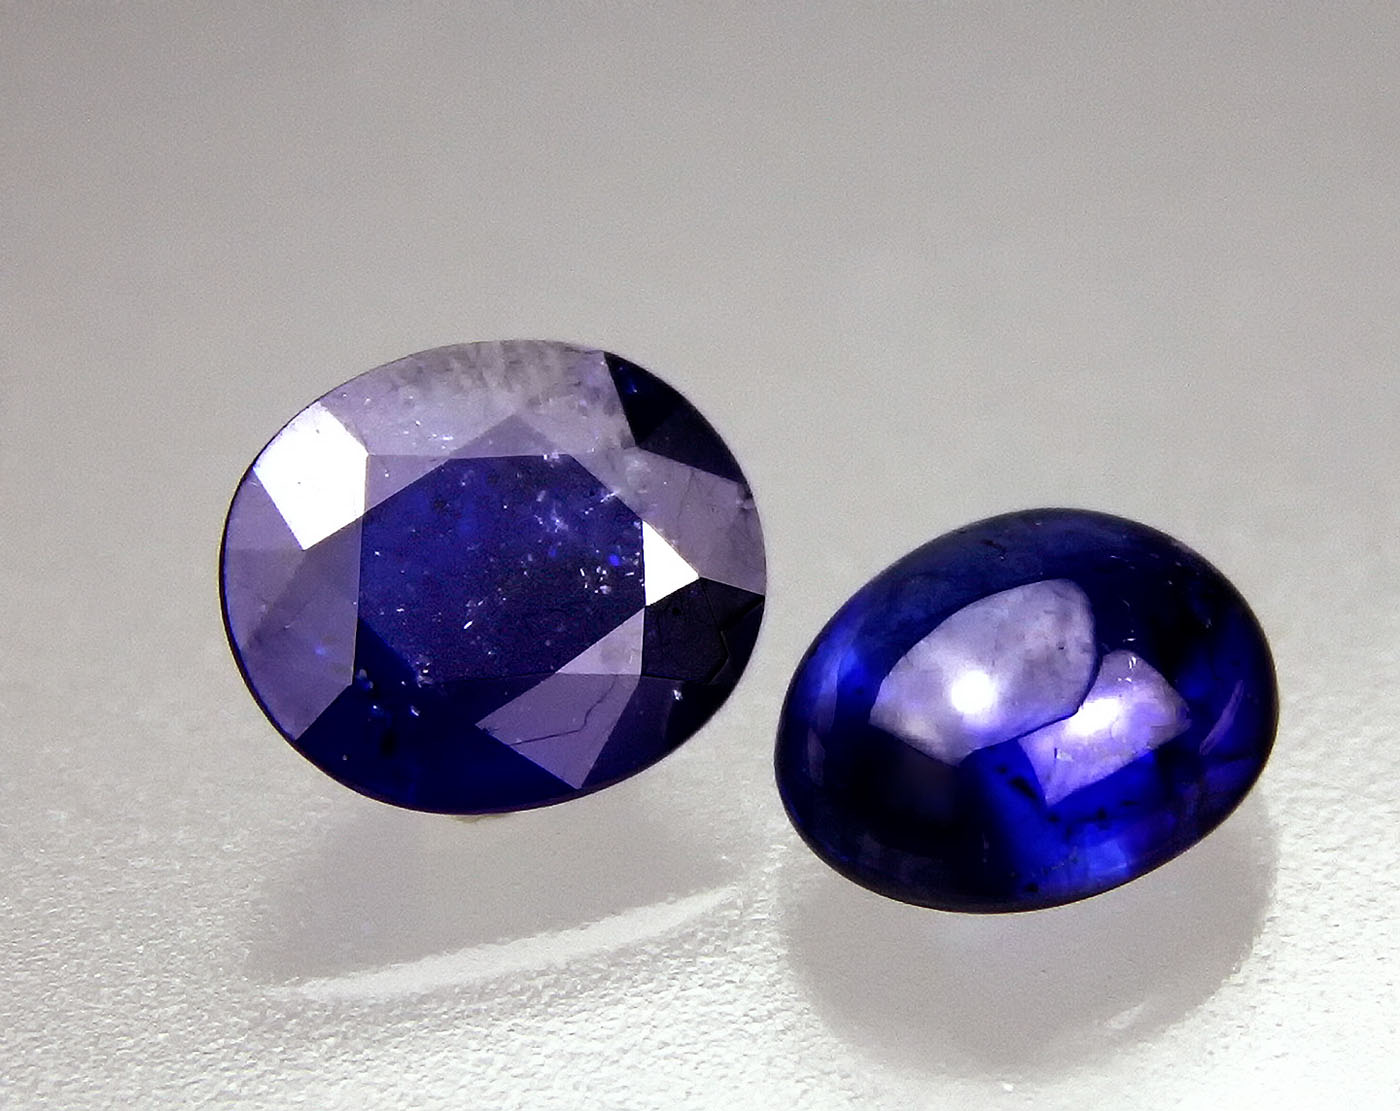 Figure 1. Two blue stones weighing 7.57 ct (left) and 6.62 ct (right) submitted to GIT for testing in May 2012. (Photo: Warinthip Krajae-Jan).